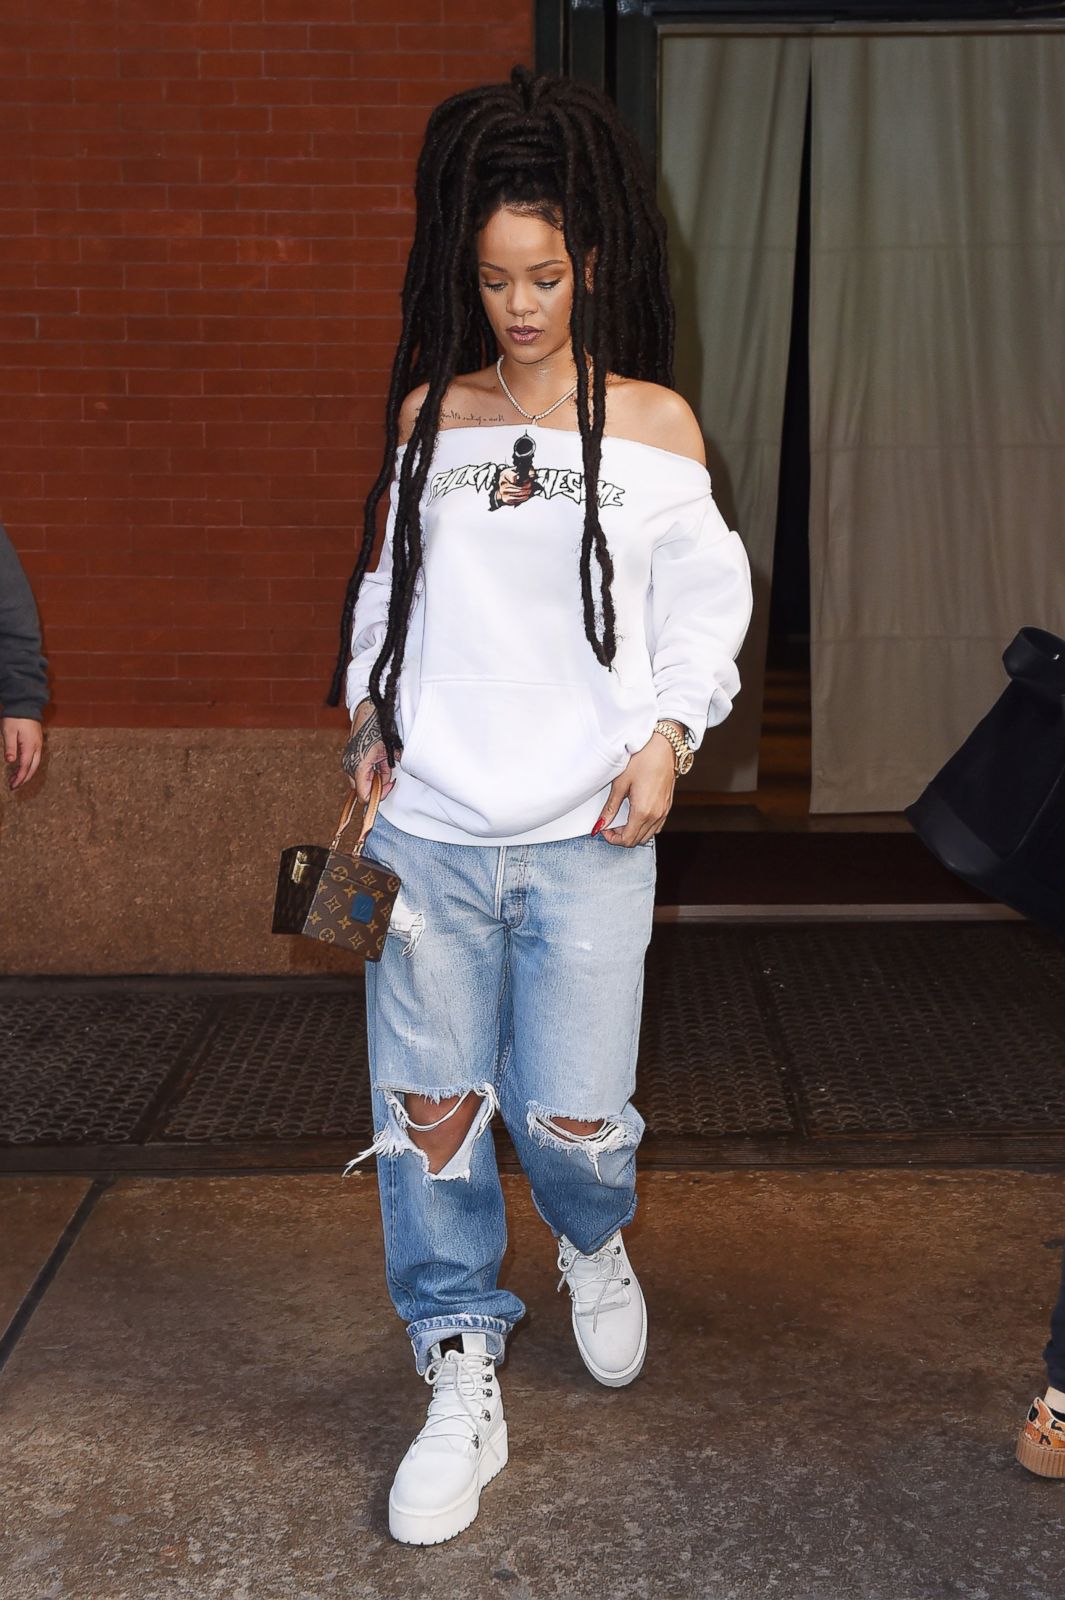 Rihanna Shows Off a New Look Picture | Rihanna: Through the Years - ABC ...